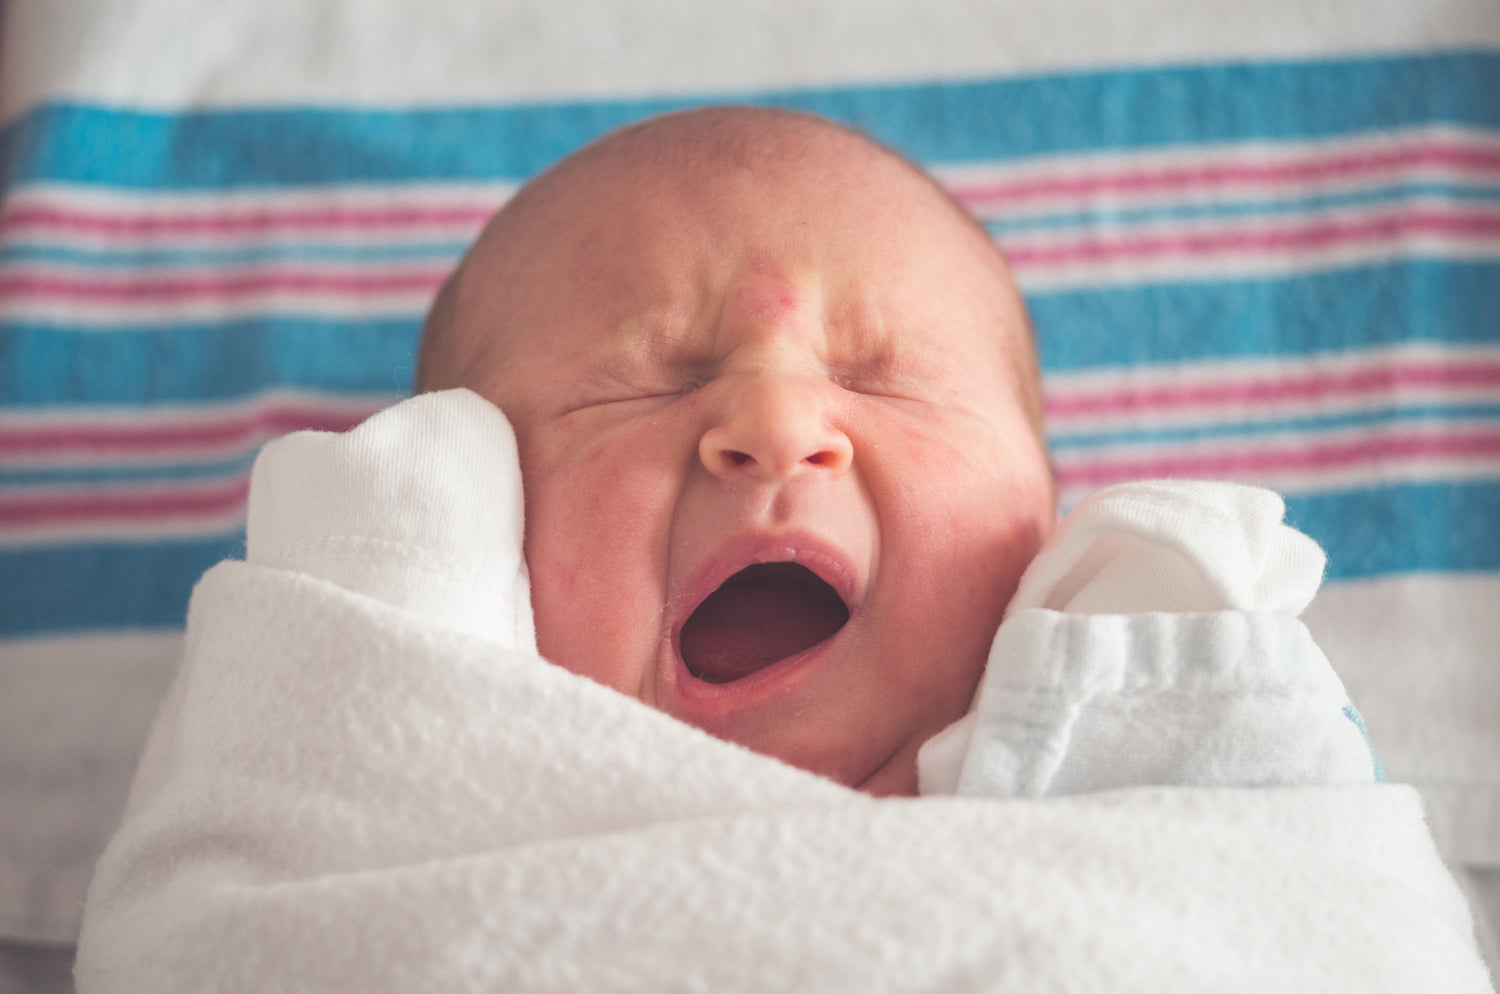 Colic 101: How to Diagnose and Deal With it